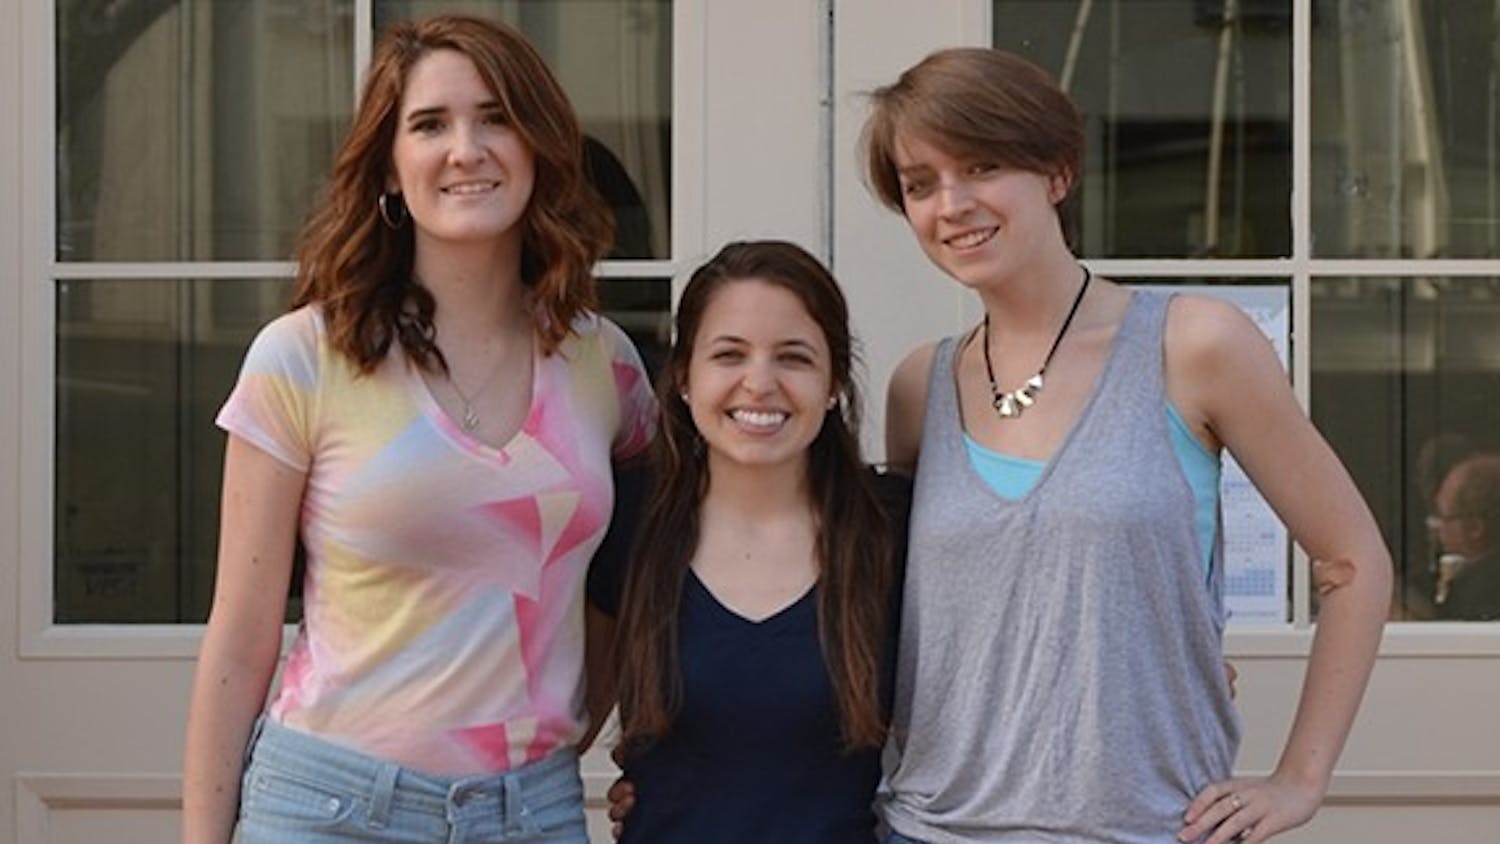 Alexandria Huber (left), Jessie Robinson (center), and Jillian Tillett (right) are student interns working with Carolina Dining Services.  They work to calculate the percentage of real food that Carolina Dining Services purchases and distributes in the UNC campus dining facilities. This internship was created four years ago, and this is the first time the calculations will be done for the spring semester.